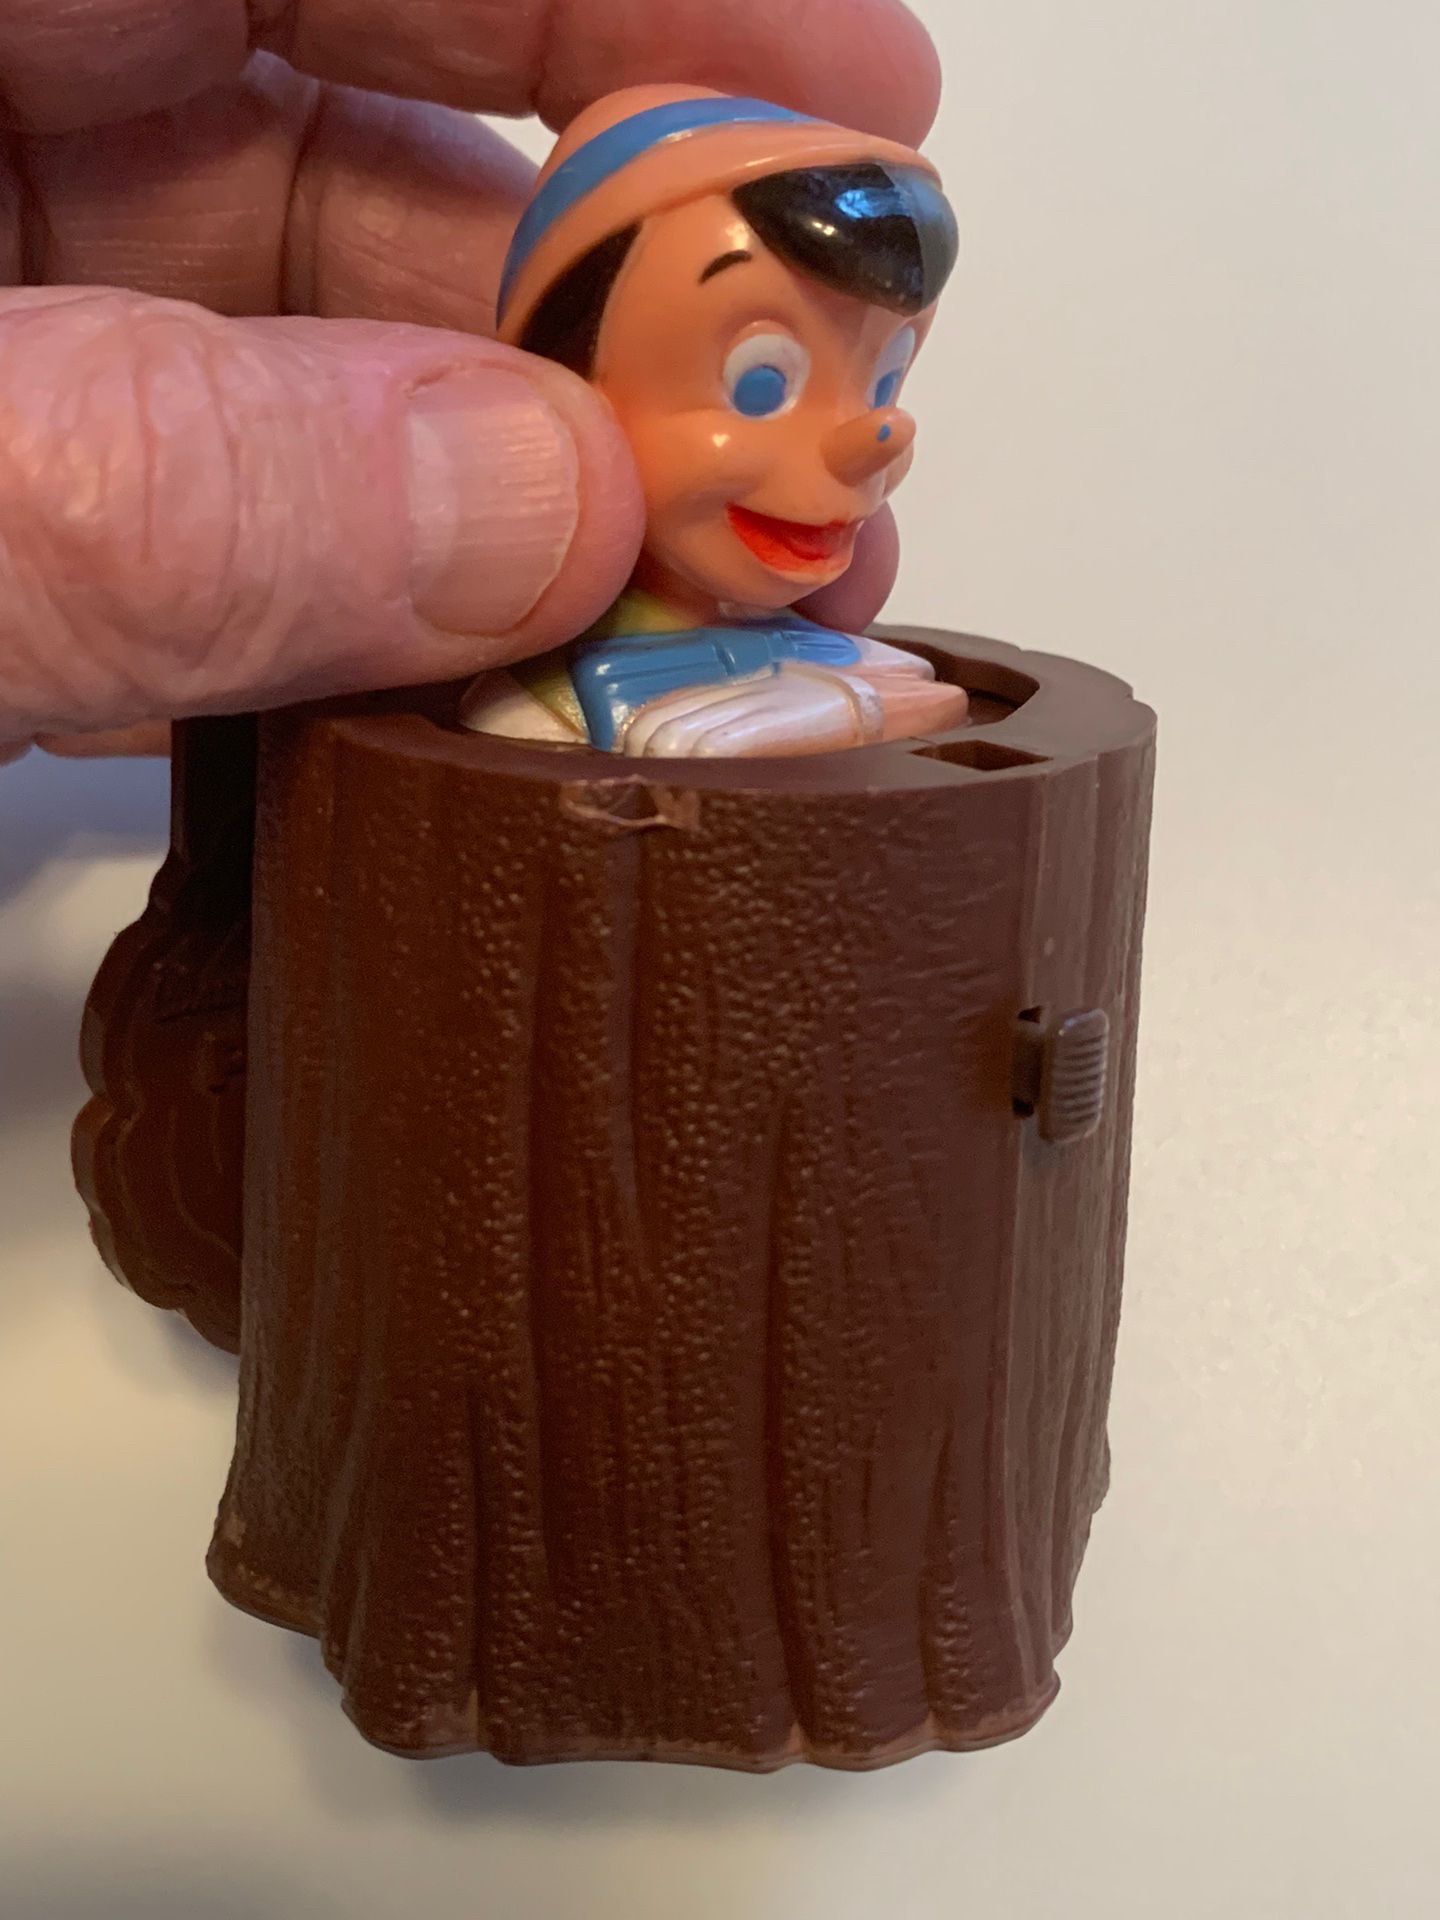 Vintage PINOCCHIO PUSH BUTTON POP-PAL #5994 made in Hong Kong